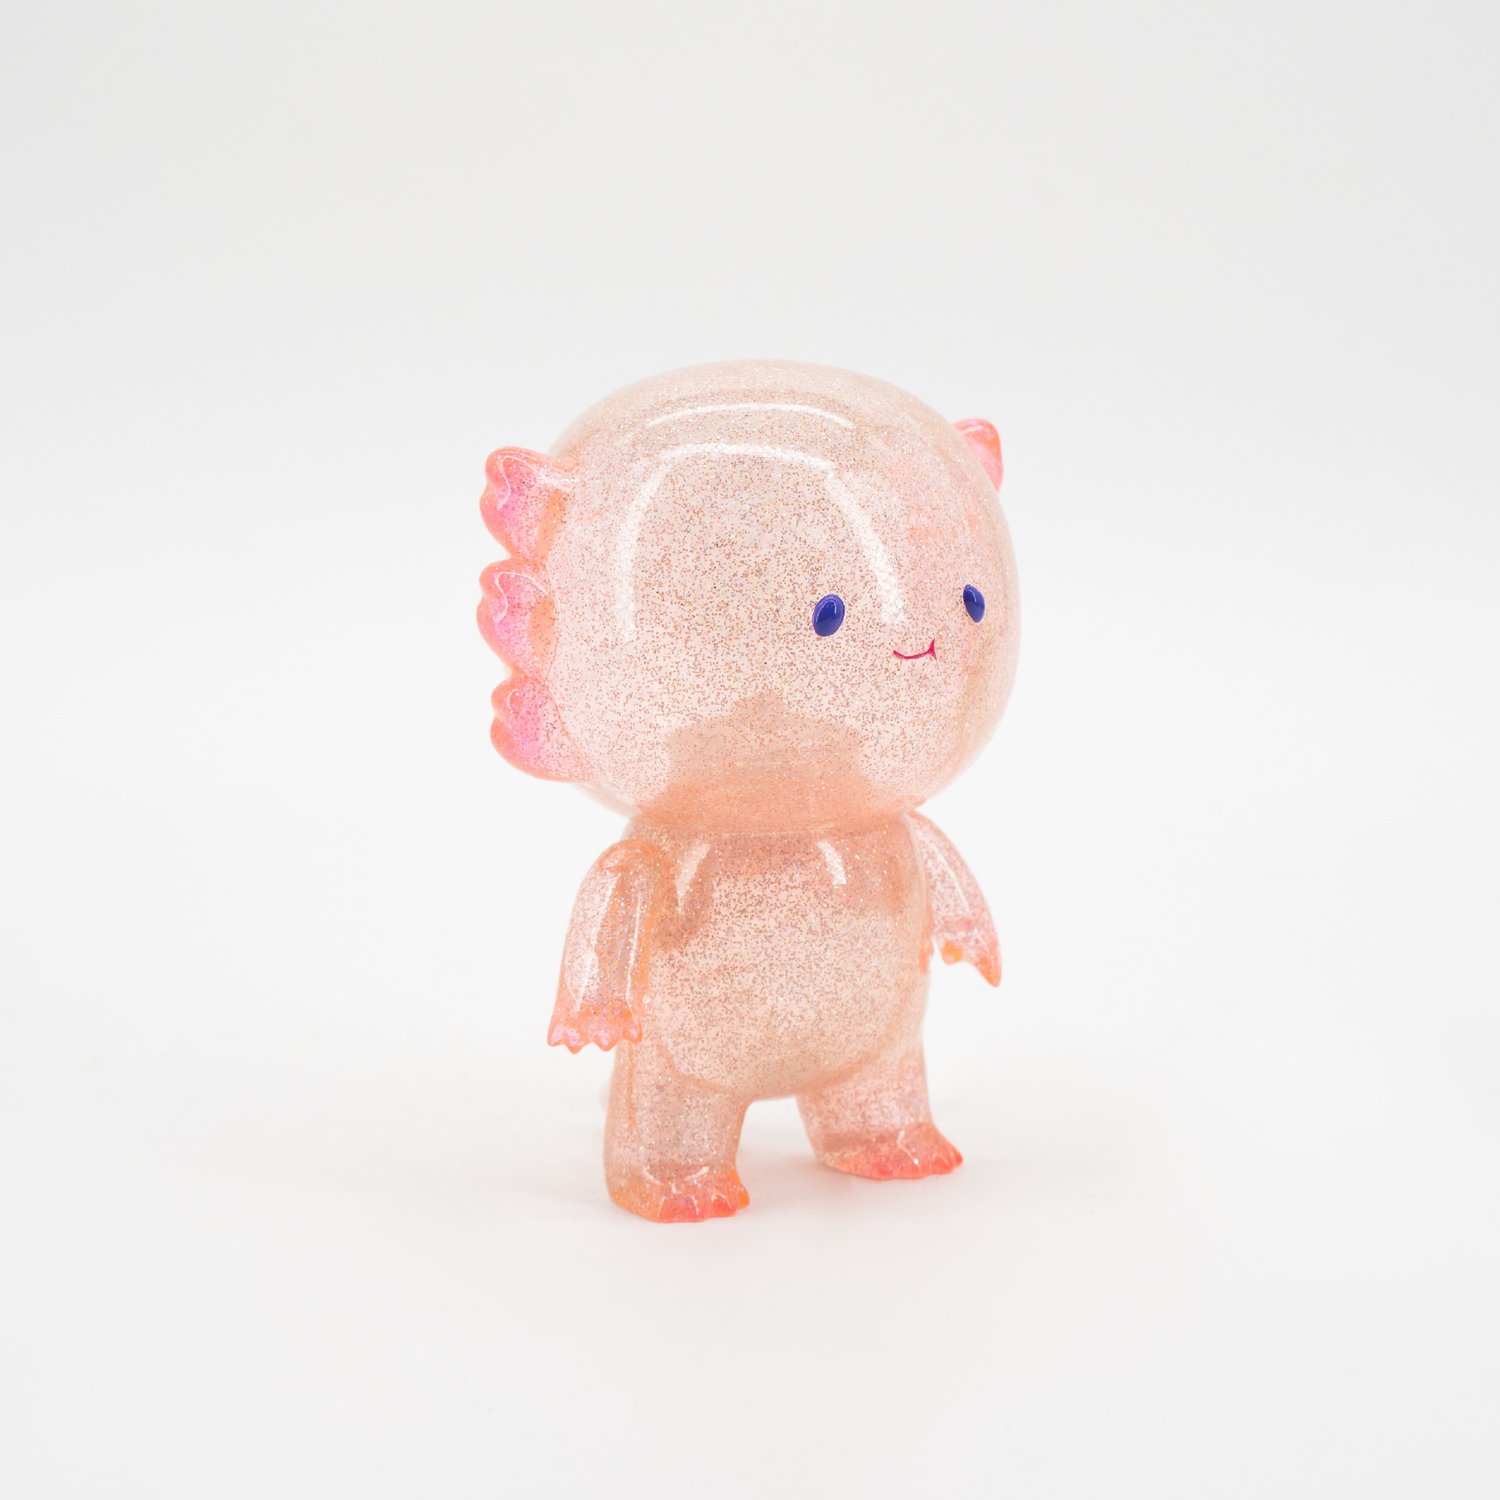 Image of AXEL THE CHUBBY MONSTER (PINK GLITTER VARIANT)